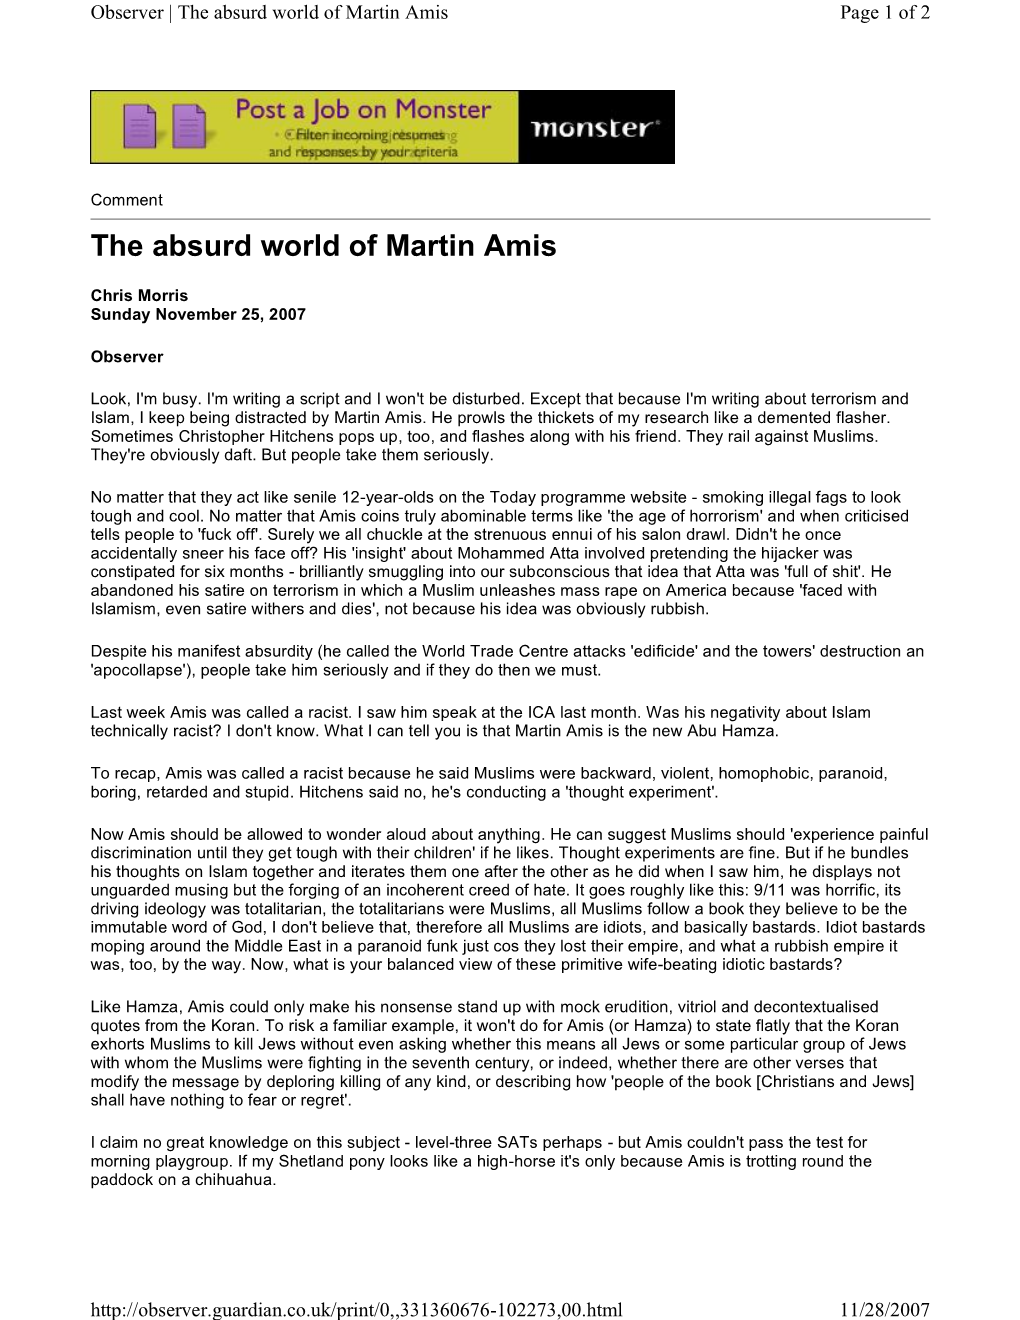 The Absurd World of Martin Amis Page 1 of 2